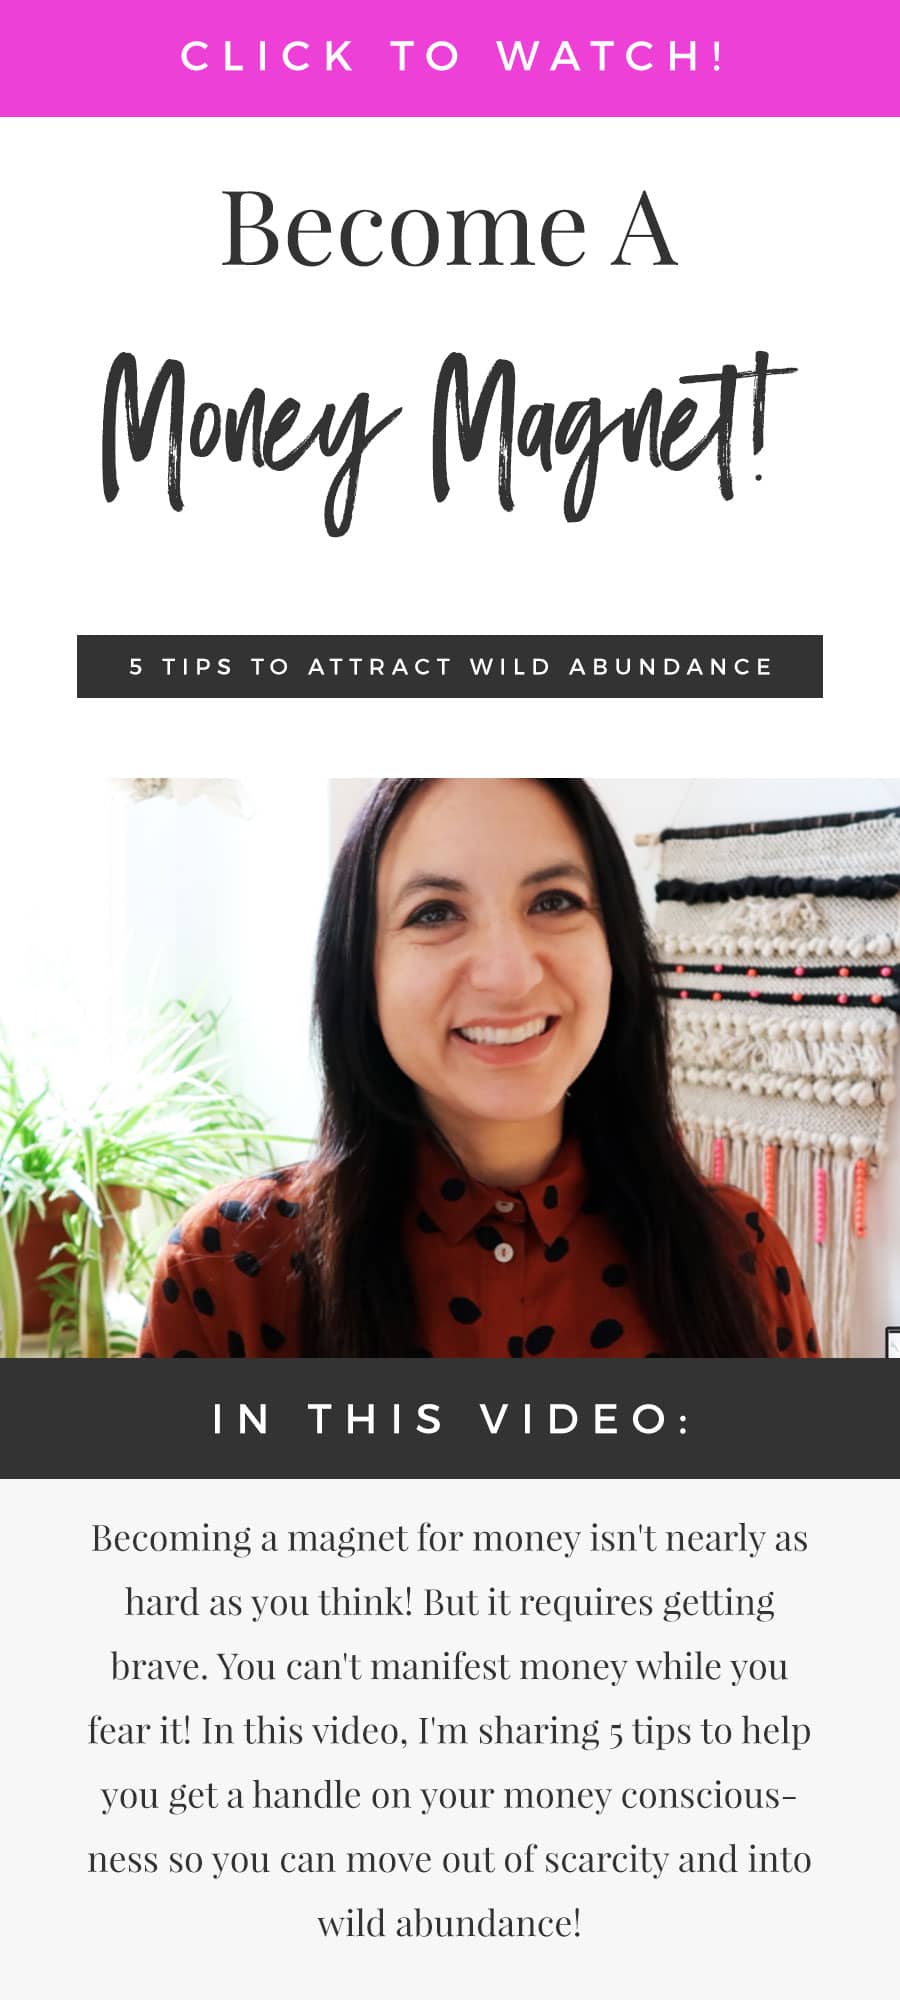 Become A Money Magnet! 5 Tips To Attract Wild Abundance